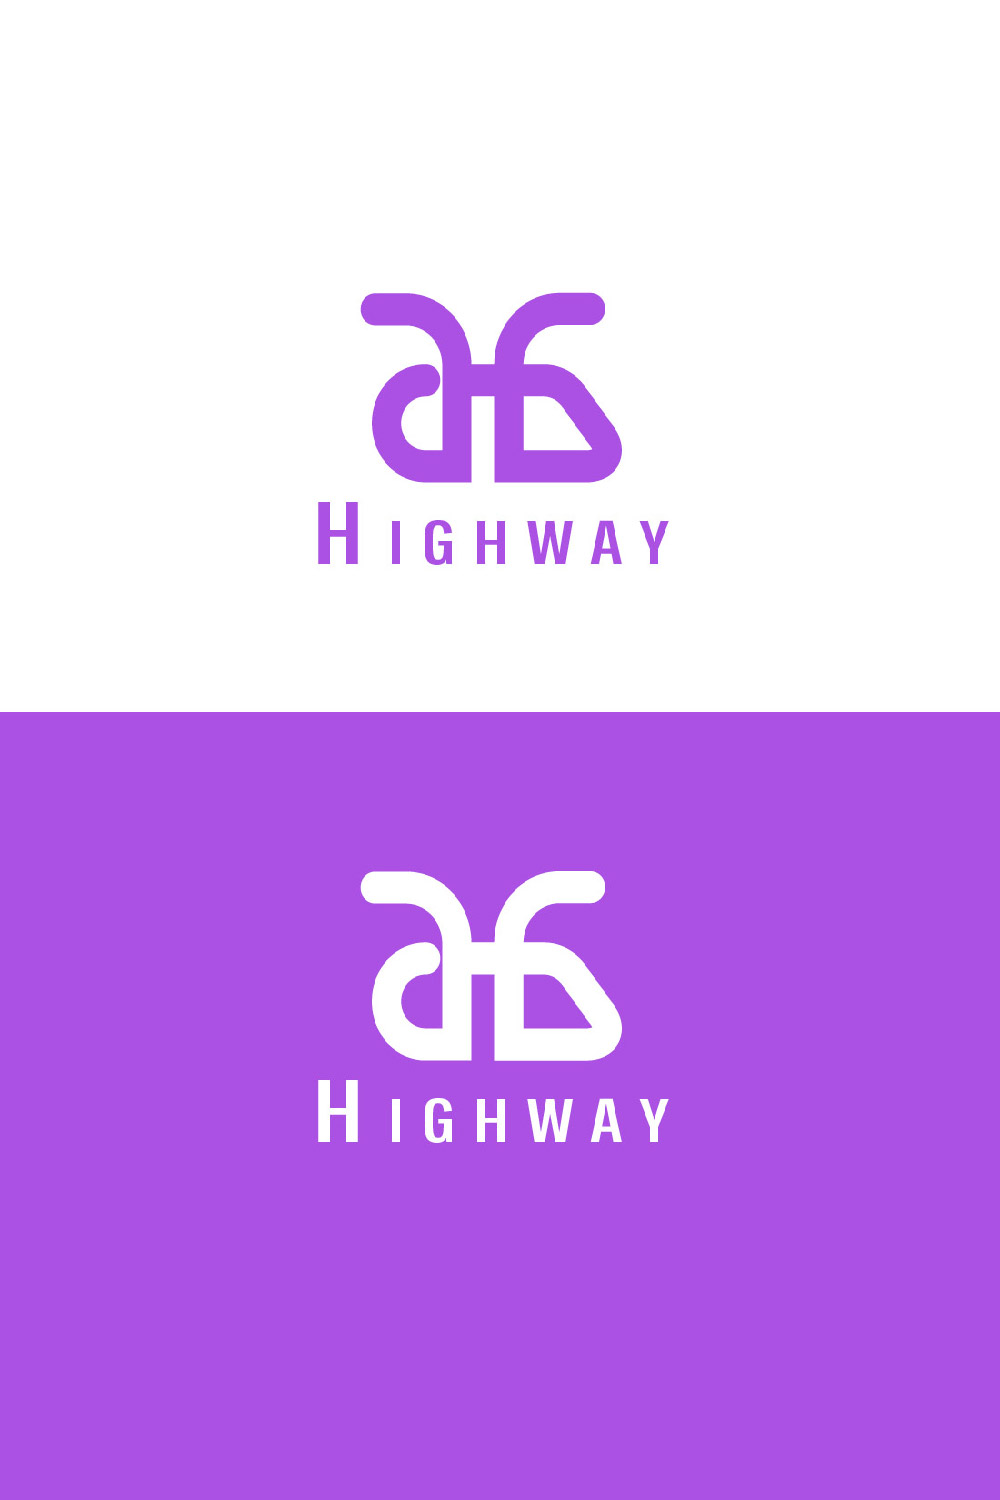 Highway pinterest preview image.